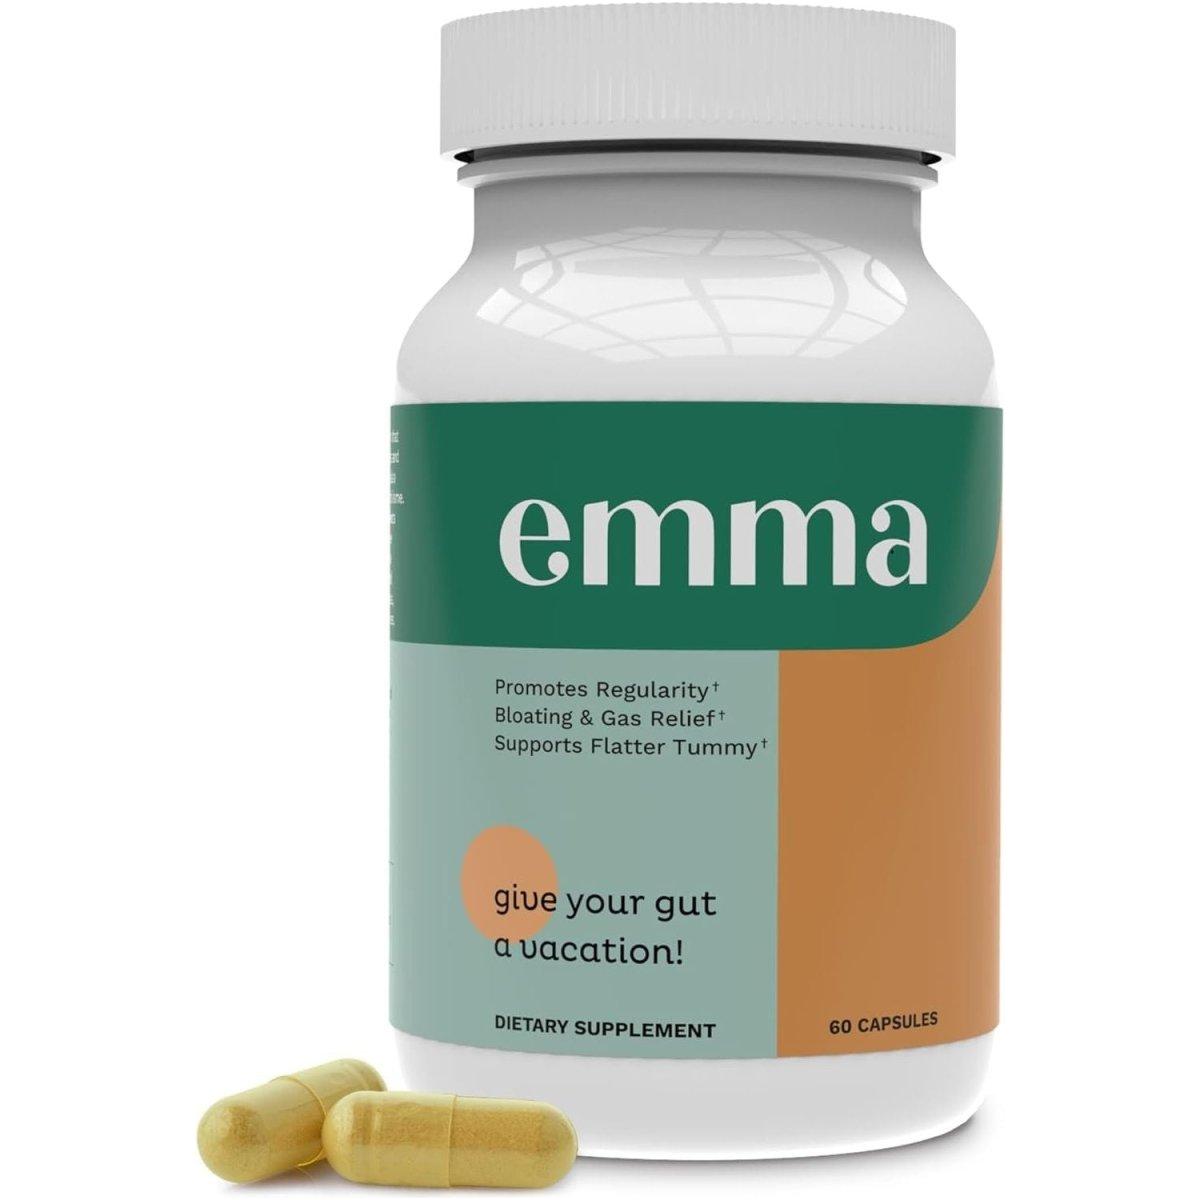 Emma Daily Digestive Supplement - One Month Supply60 Capsules - Glam Global UK